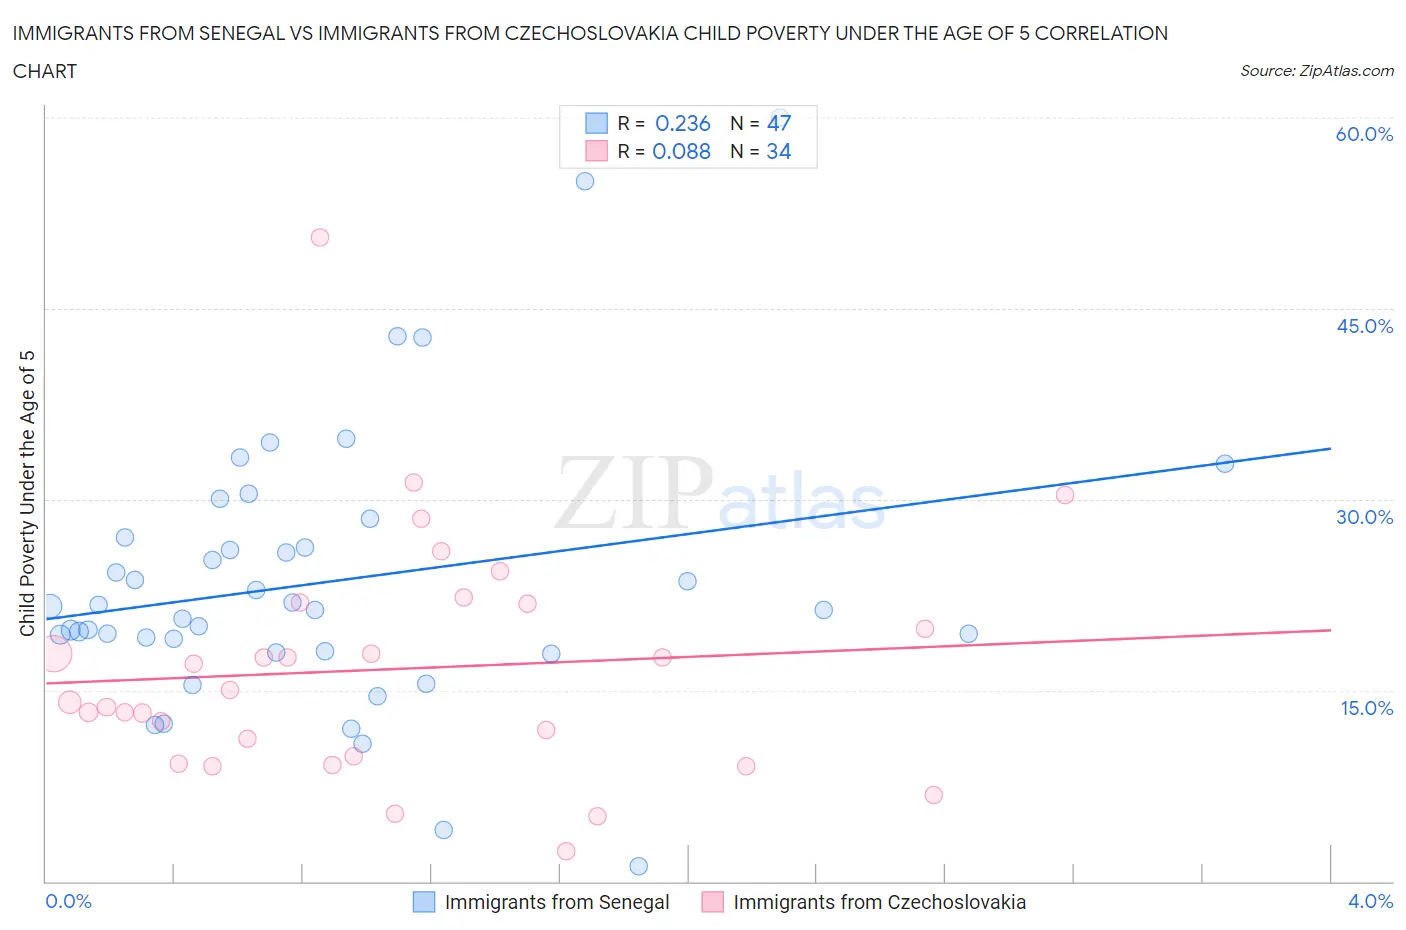 Immigrants from Senegal vs Immigrants from Czechoslovakia Child Poverty Under the Age of 5